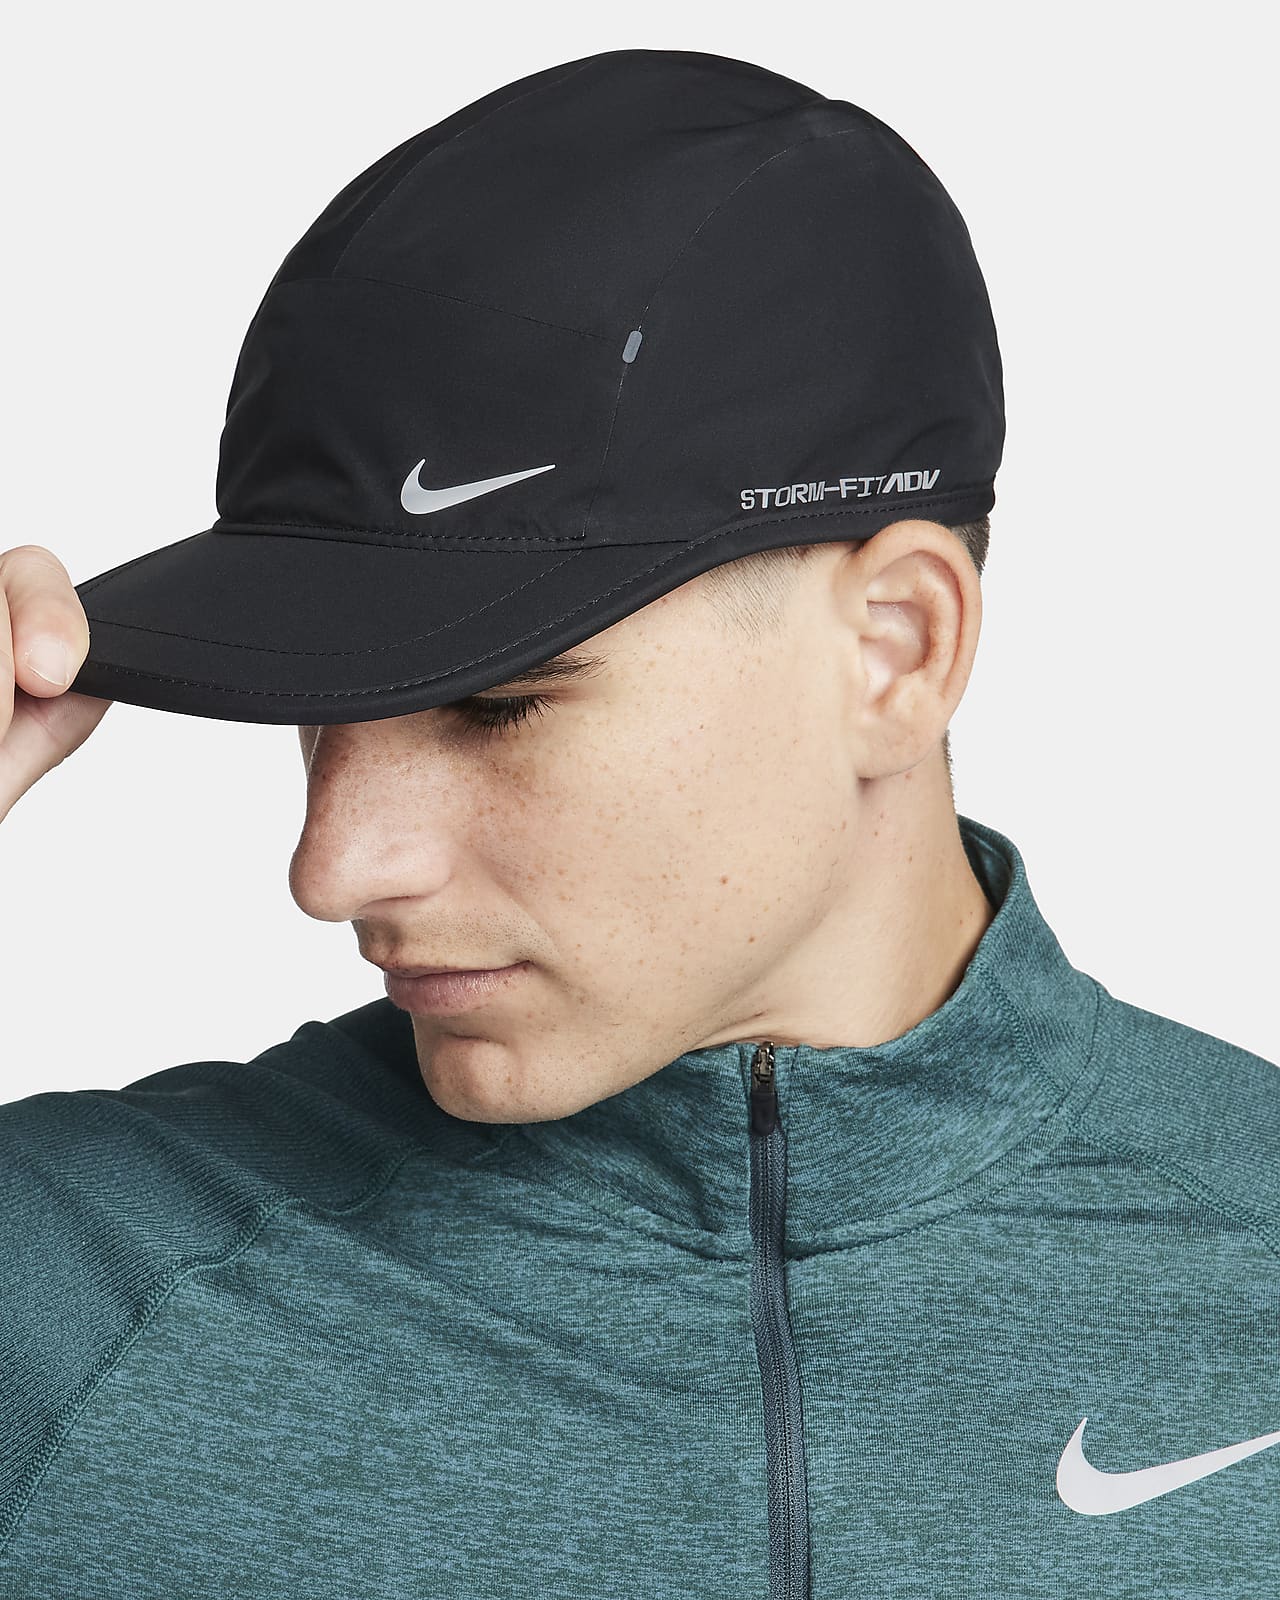 Nike Storm-FIT ADV Fly Unstructured AeroBill Cap.